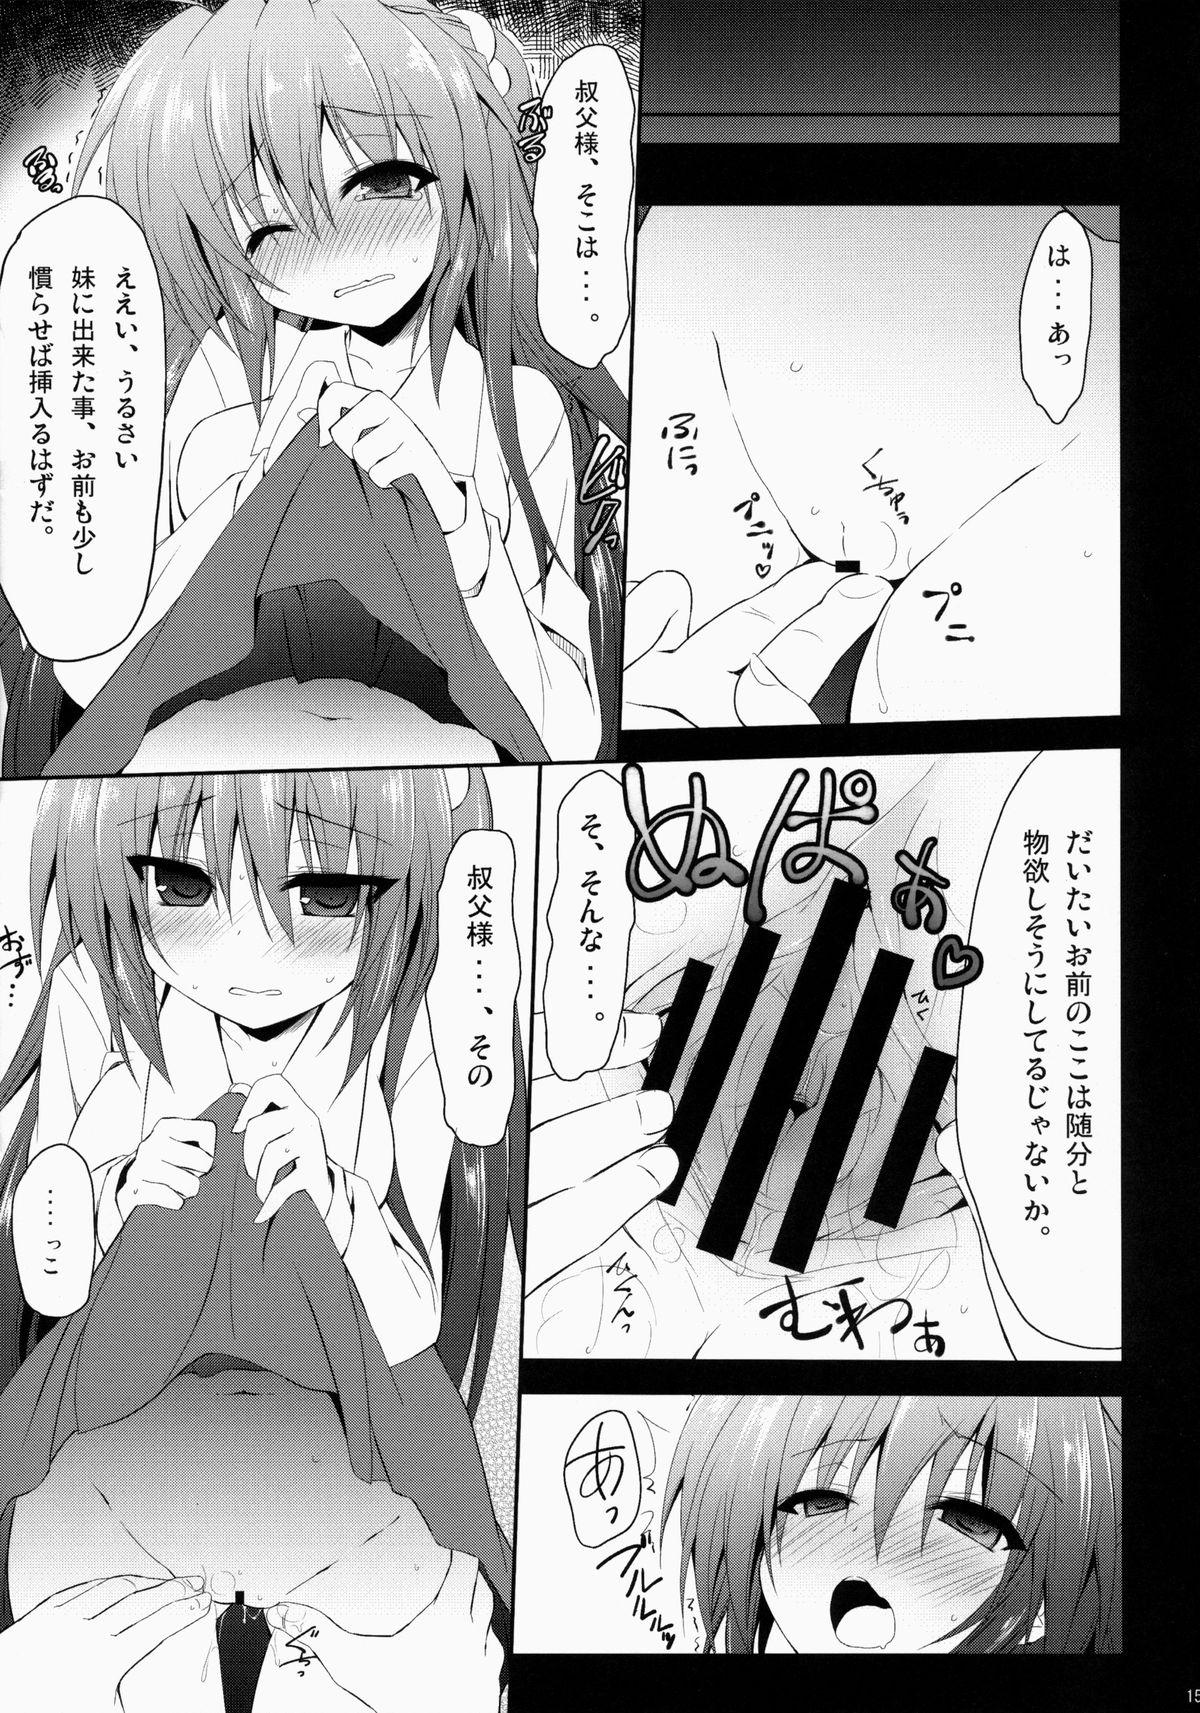 Ddf Porn far fragments - Little busters Mmf - Page 14